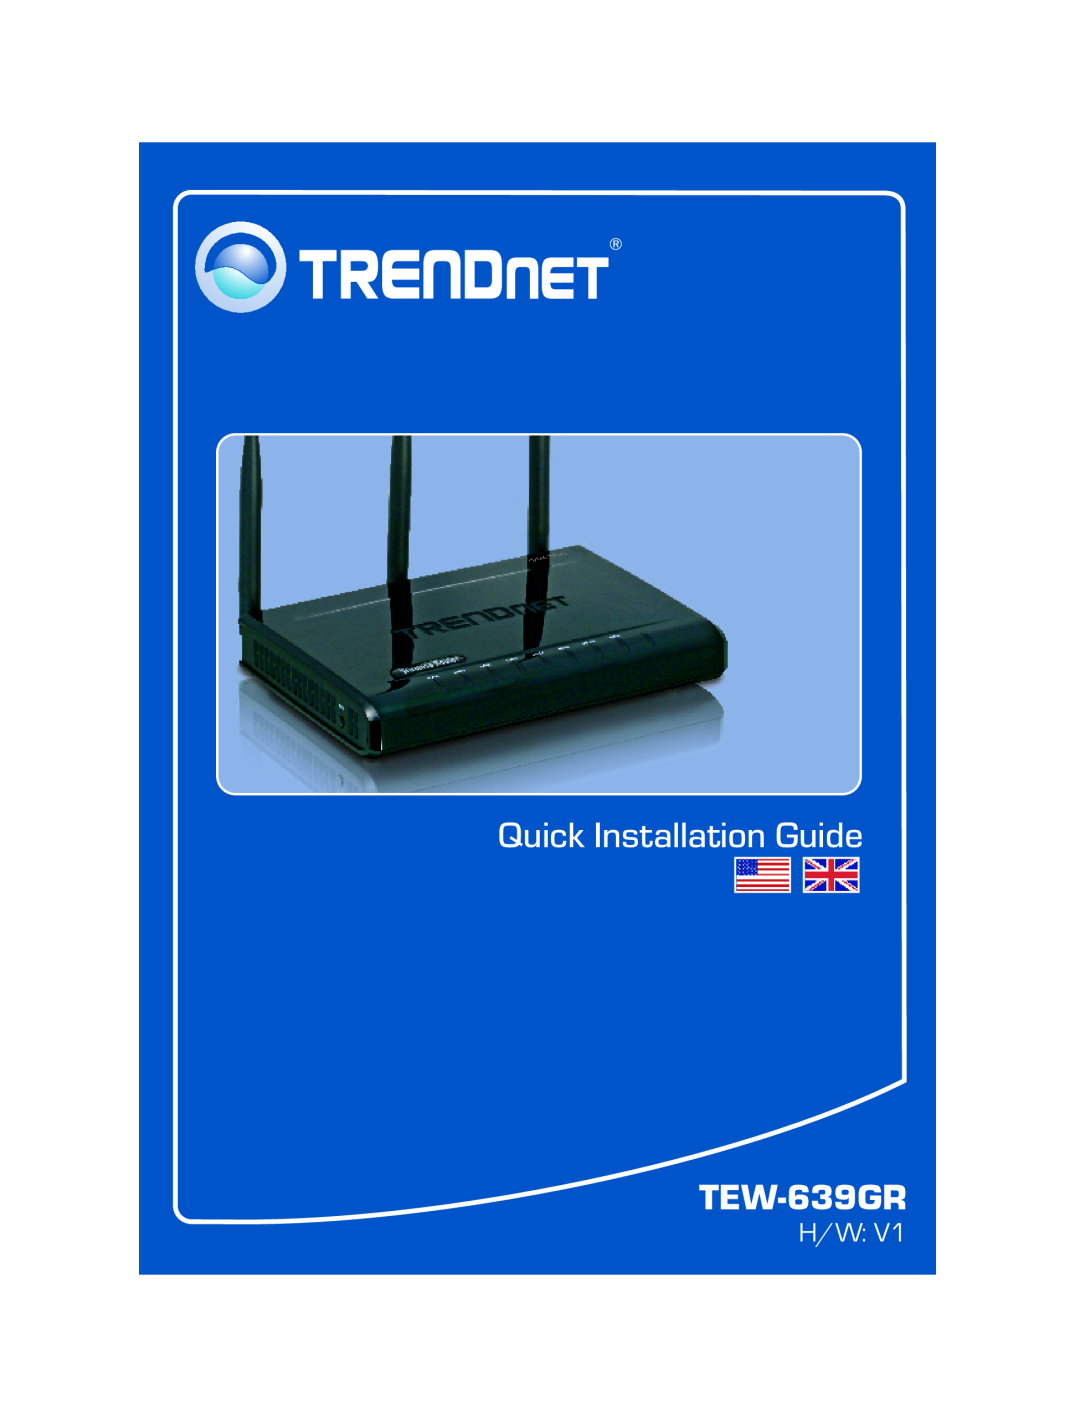 TRENDnet TEW-639GR, Wireless Router manual Quick Installation Guide 